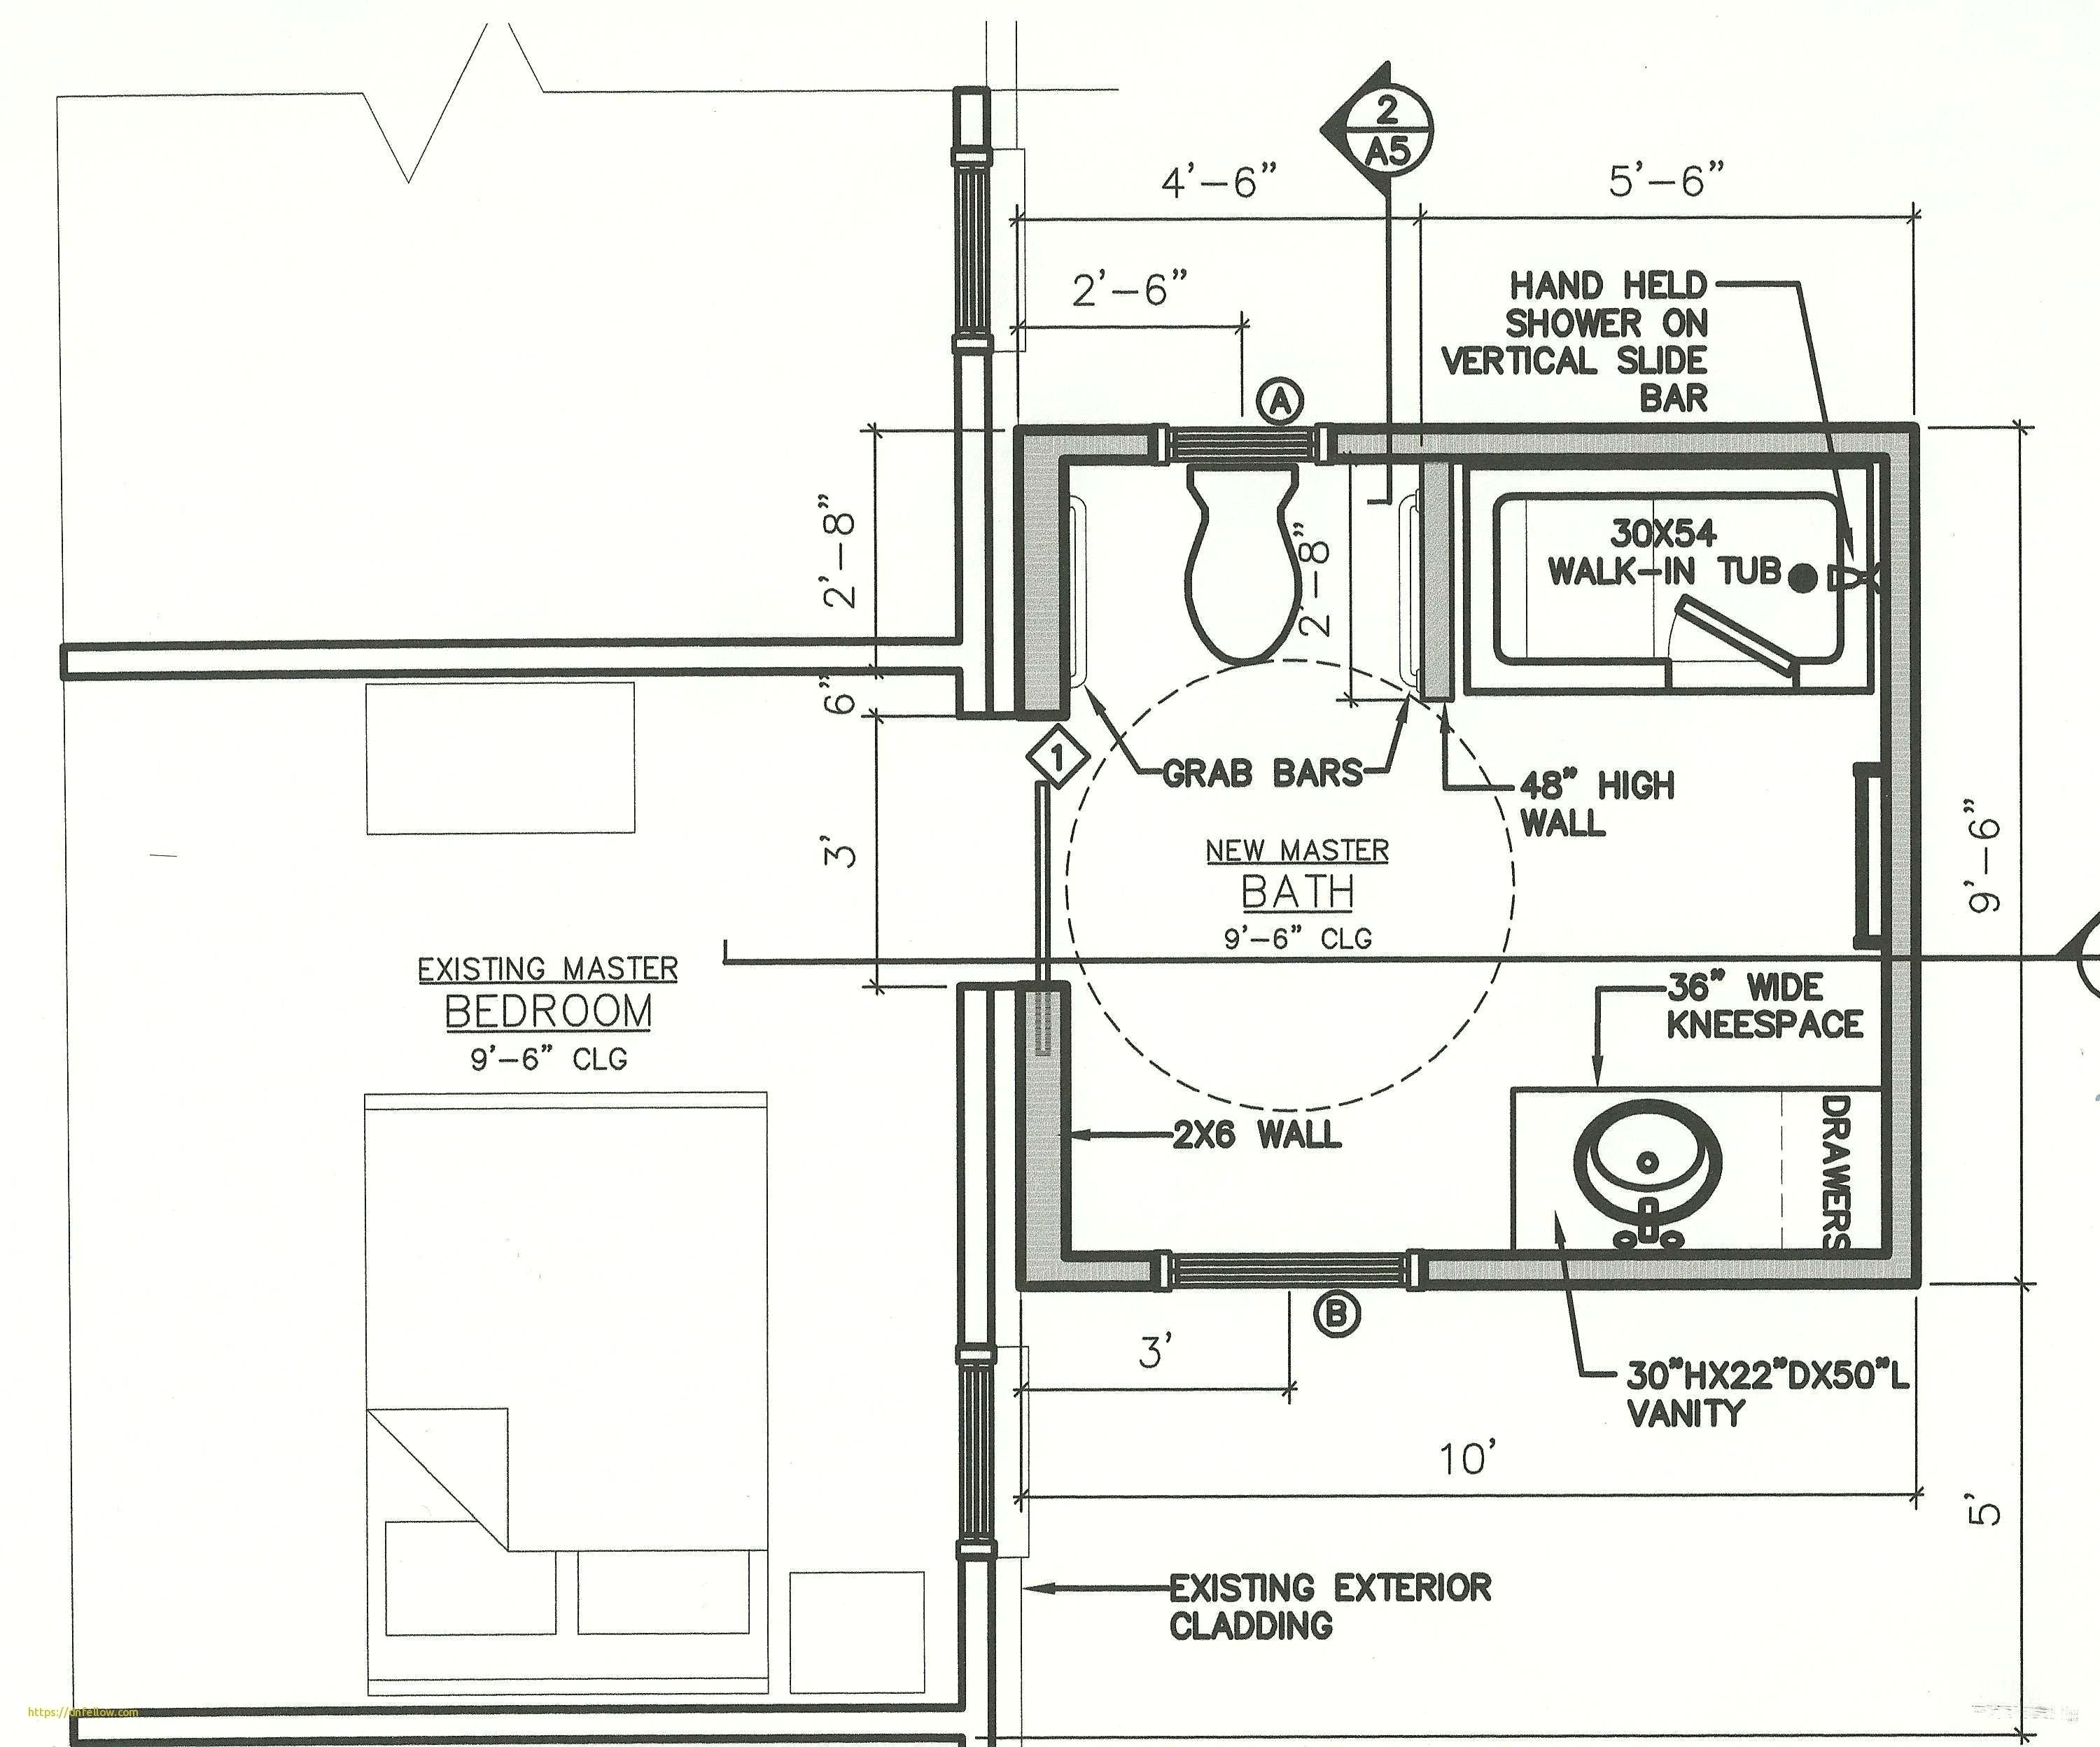 Drawing 5th Standard 28 Excellent House Plan Drawing Construction Floor Plan Design